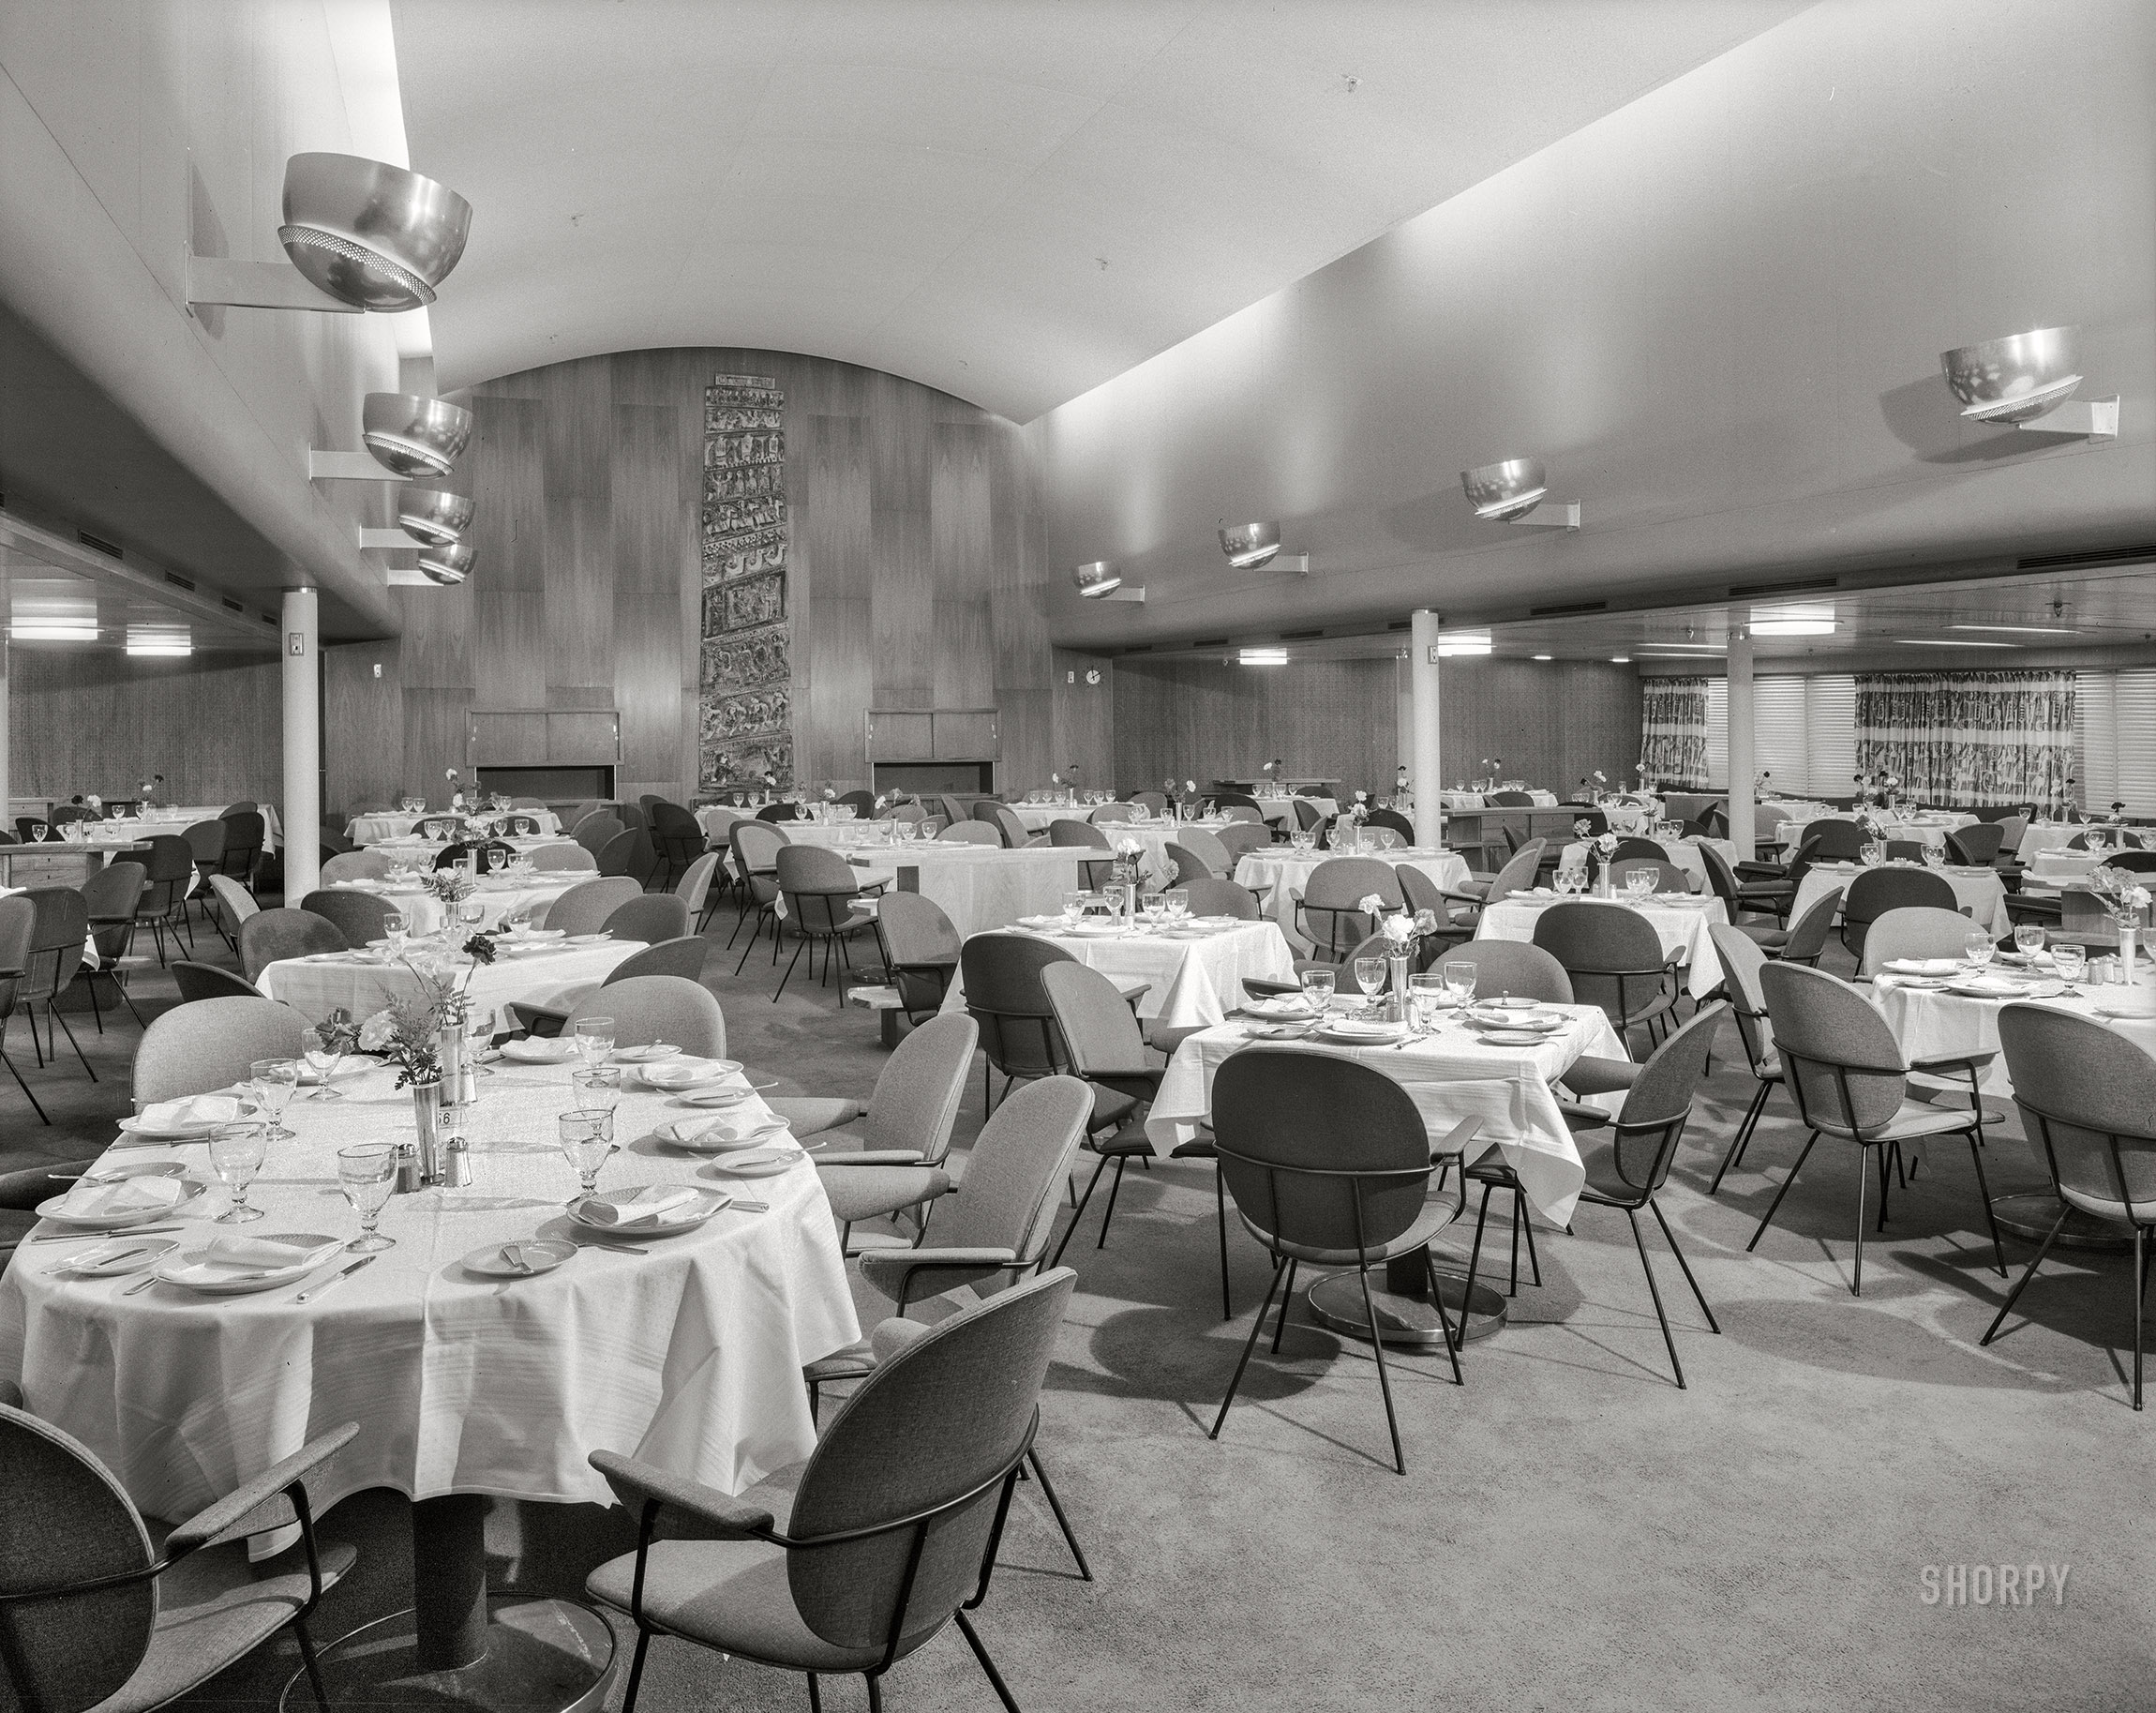 February 26, 1960. New York. "Incres Line Caribbean cruise ship M.S. Victoria. Dining room. Gustavo Pulitzer-Finali, designer." Acetate negative by Gottscho-Schleisner. View full size.